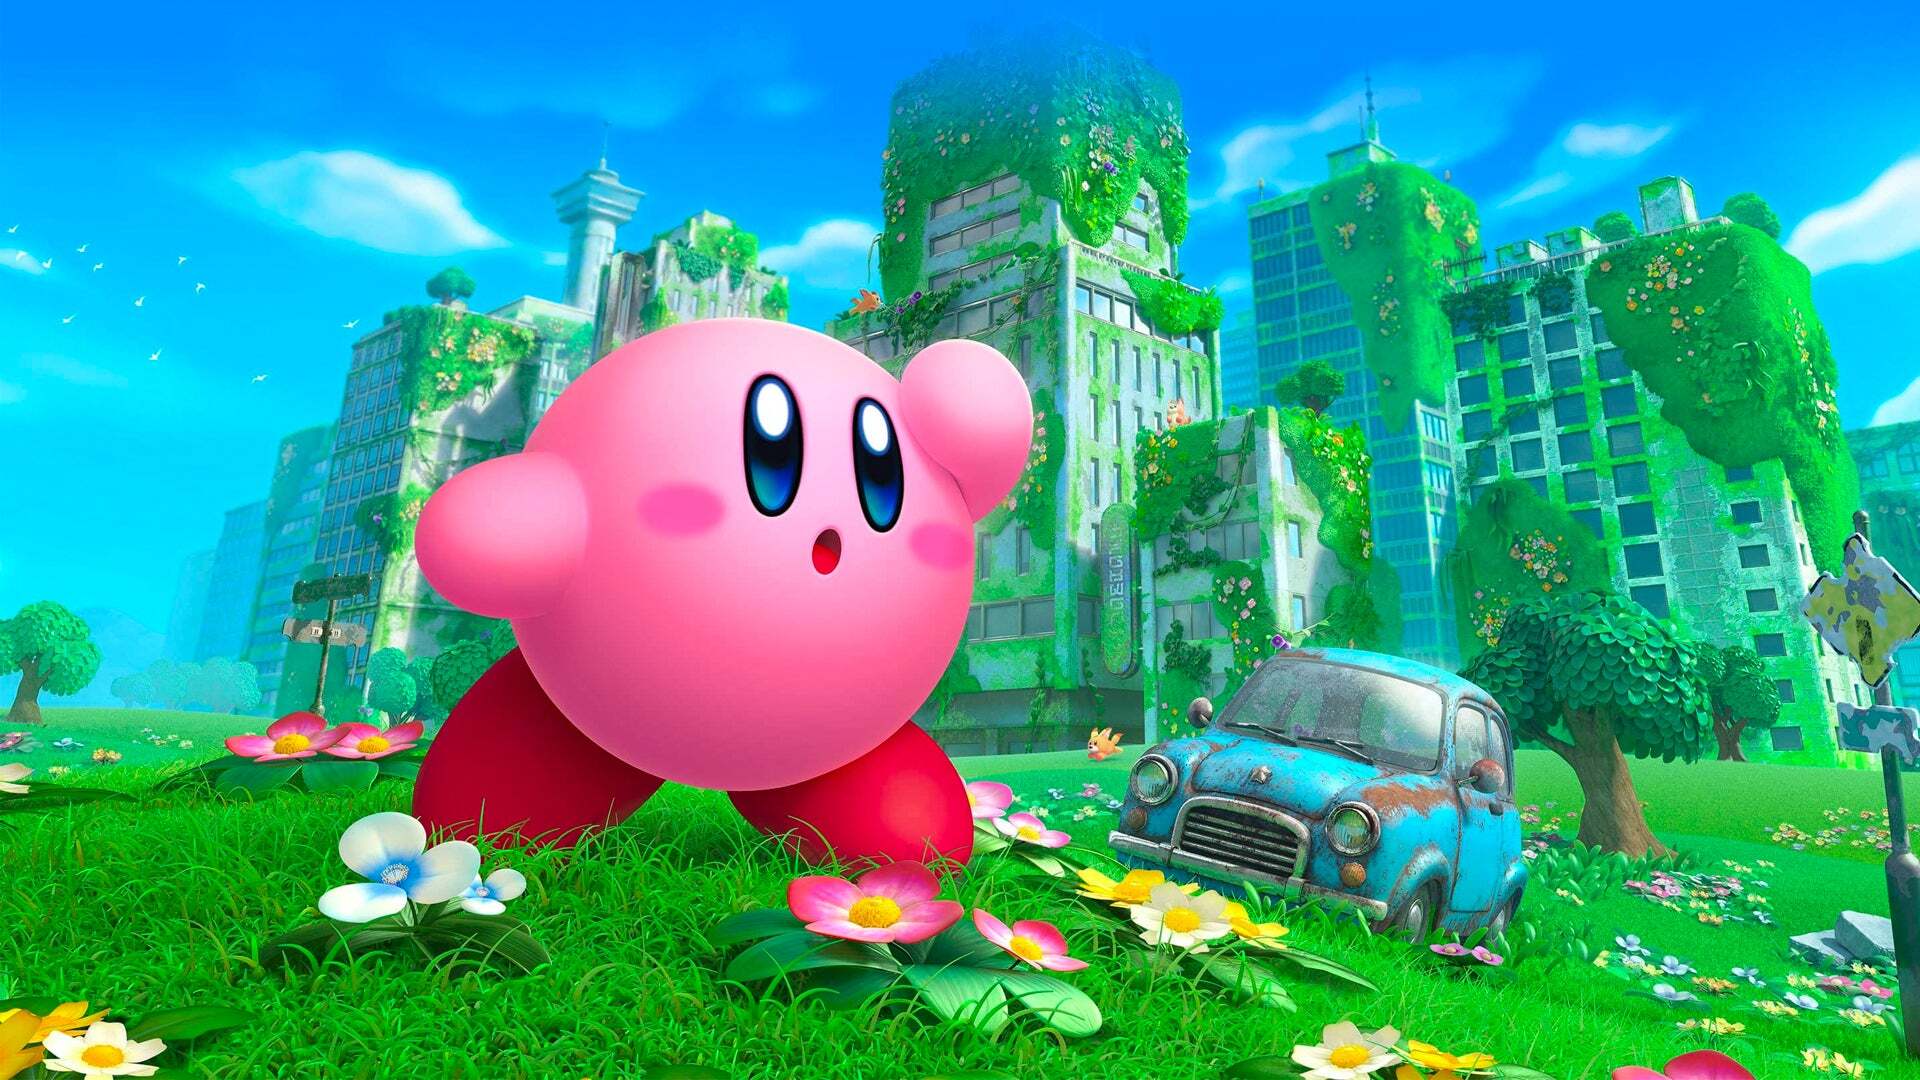 Kirby: Forgotten Land's Mouthful Mode has fans very excited - Polygon